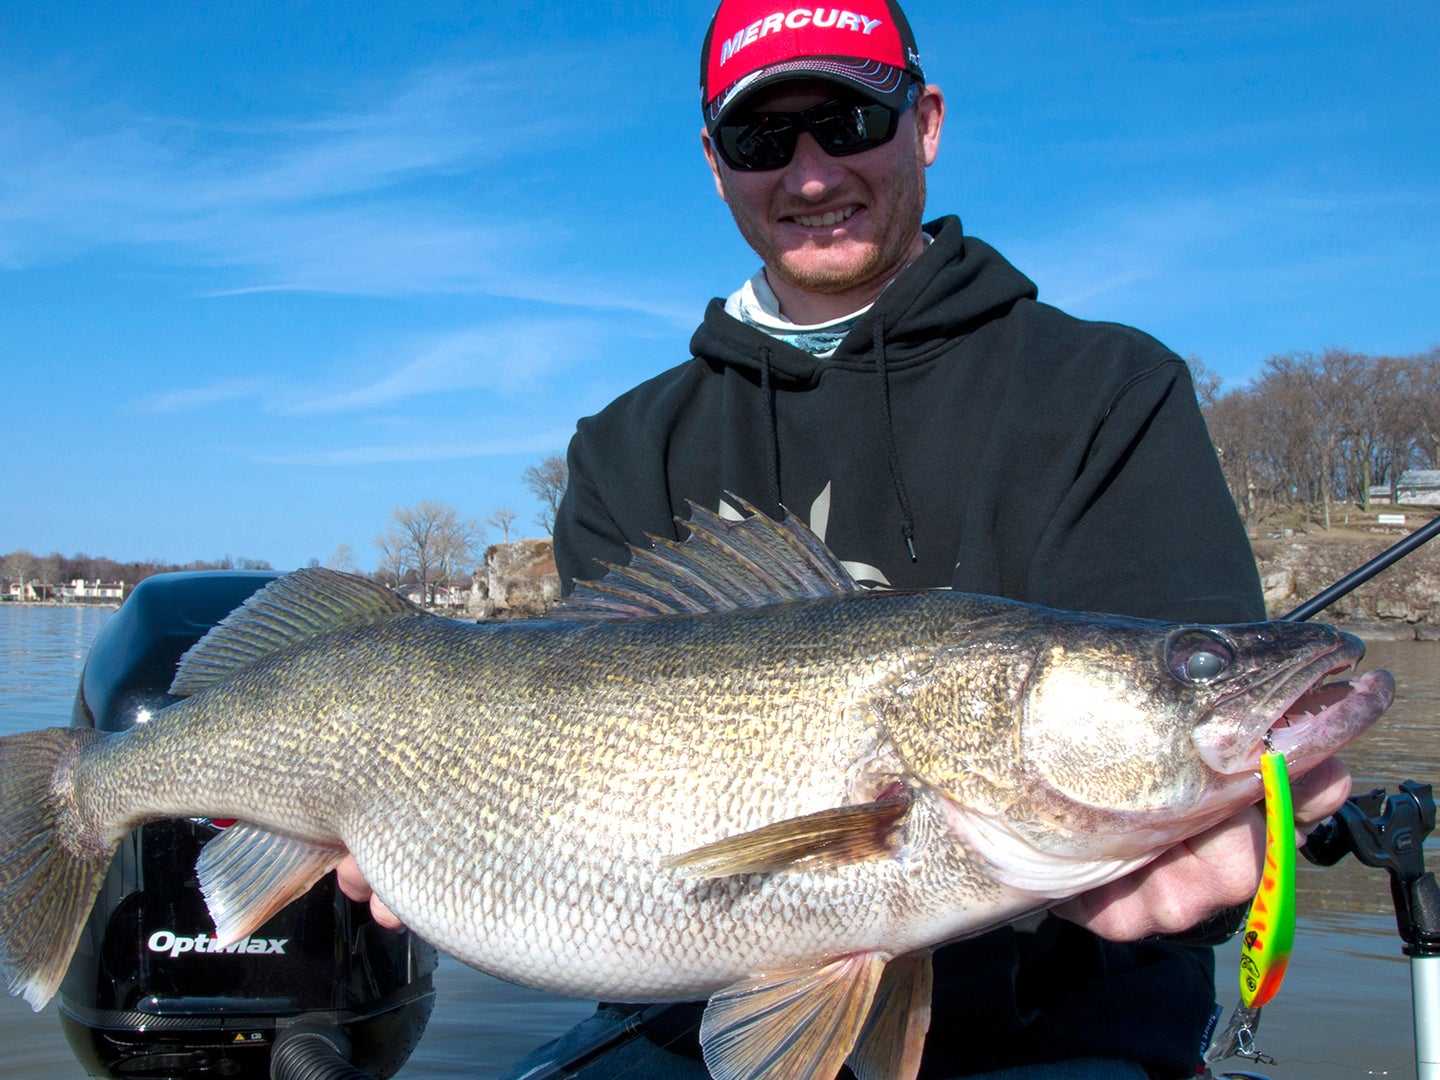 Proper rig is key when going after spring walleye